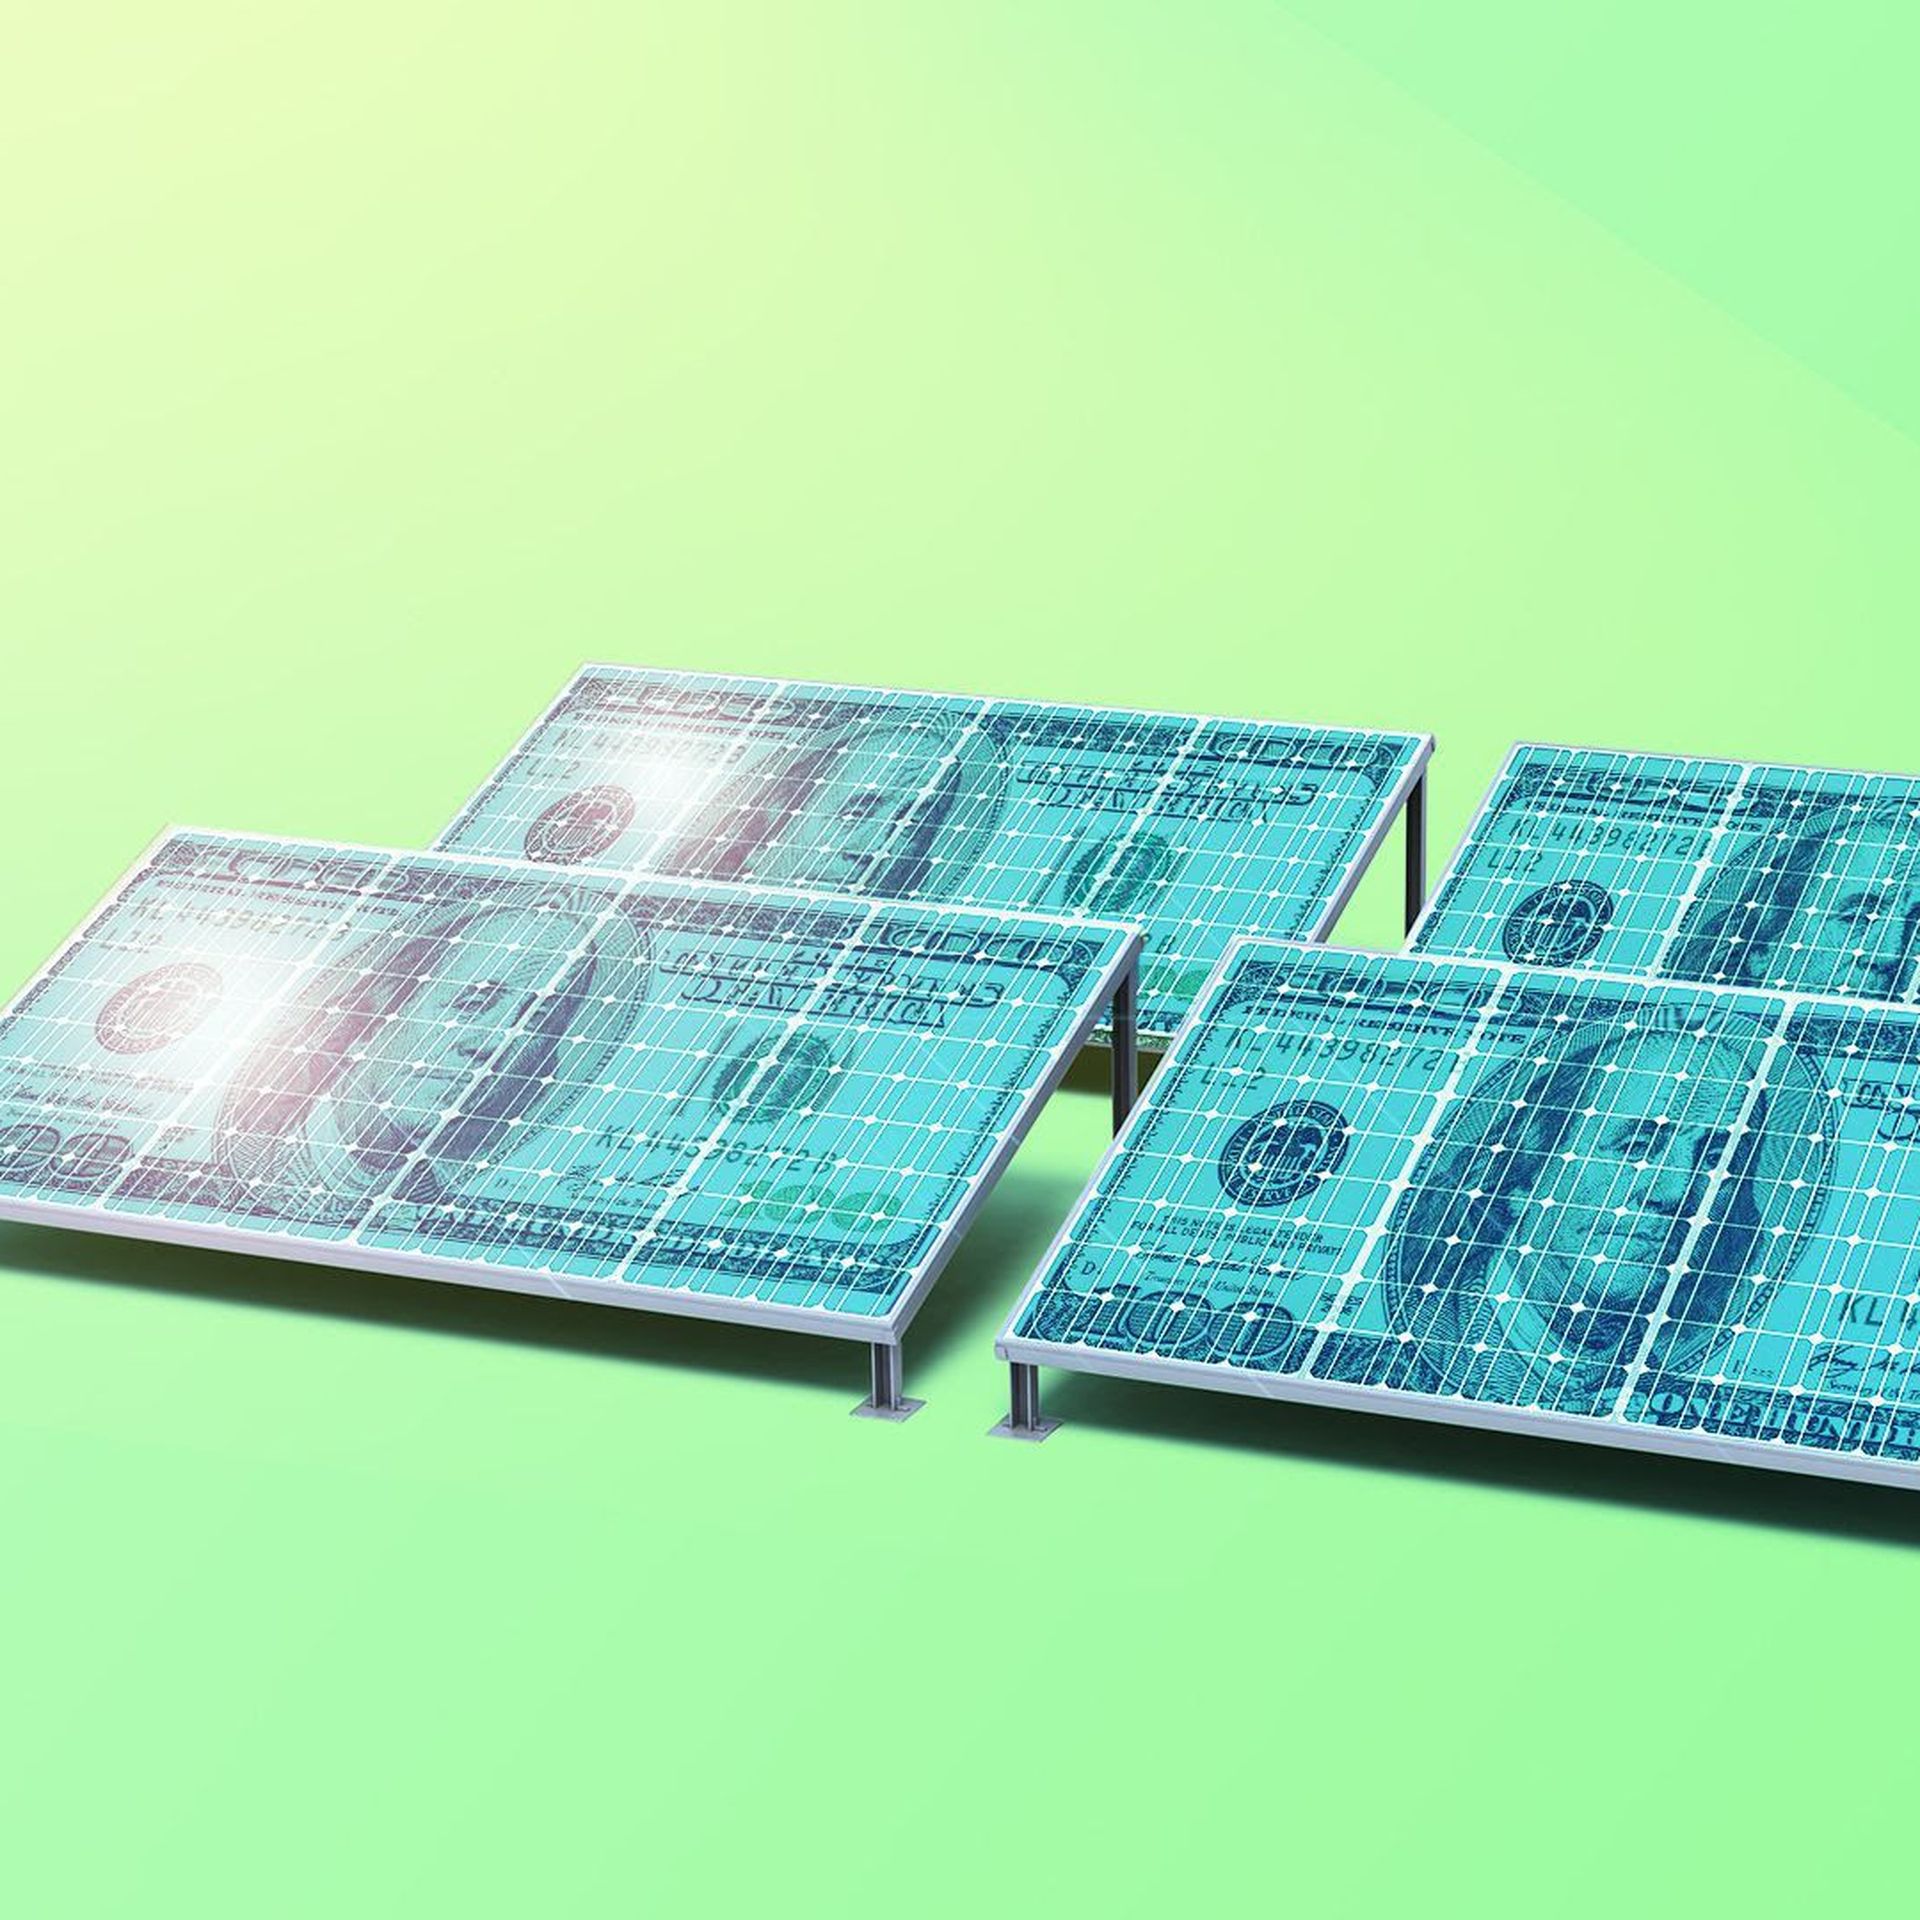 In this illustration, solar panels are designed to look like 100 dollar bills.